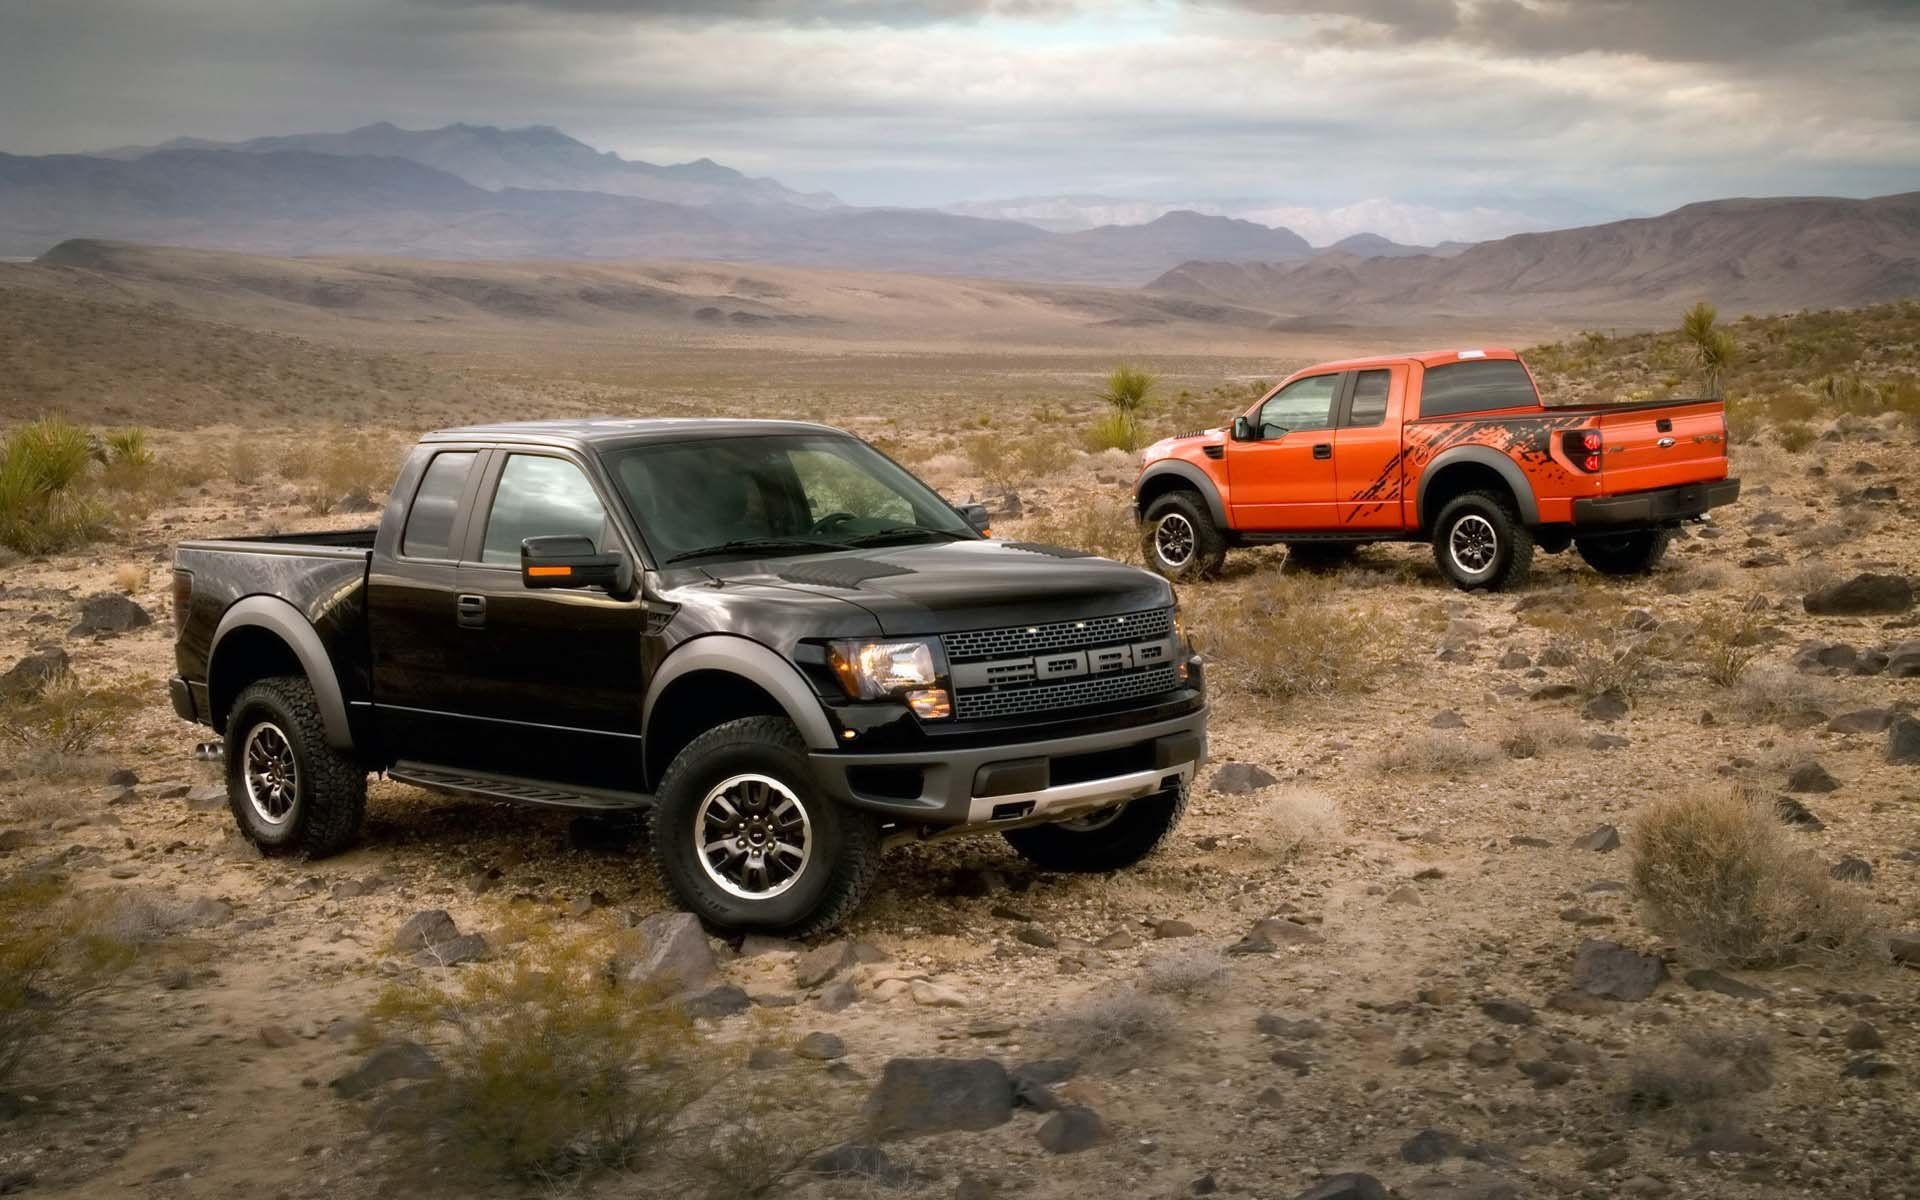 Ford Pickup Truck Widescreen HD Wallpaper Auto-Cars